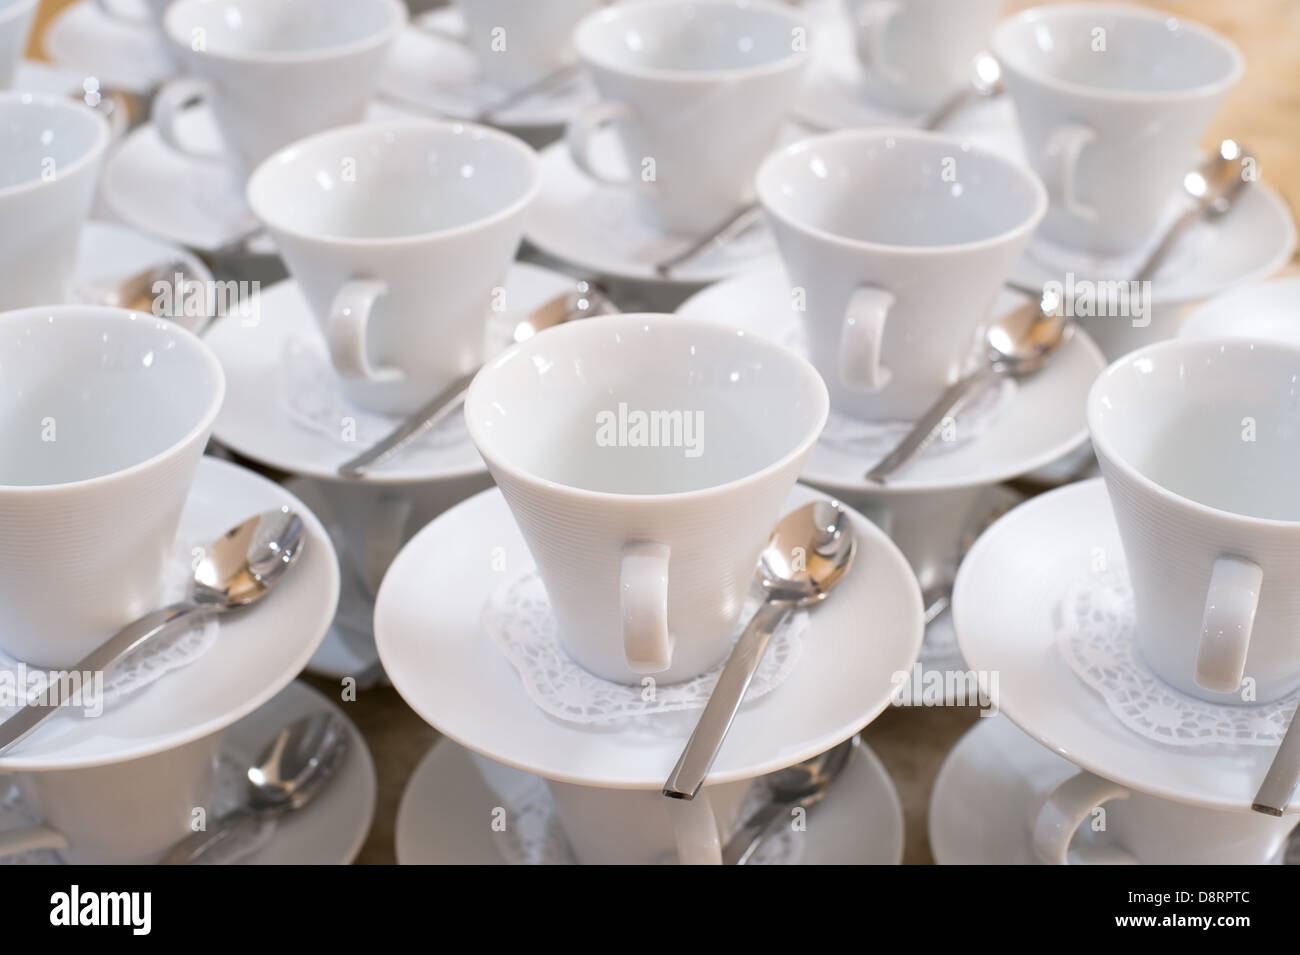 cups on saucers with teaspoons Stock Photo